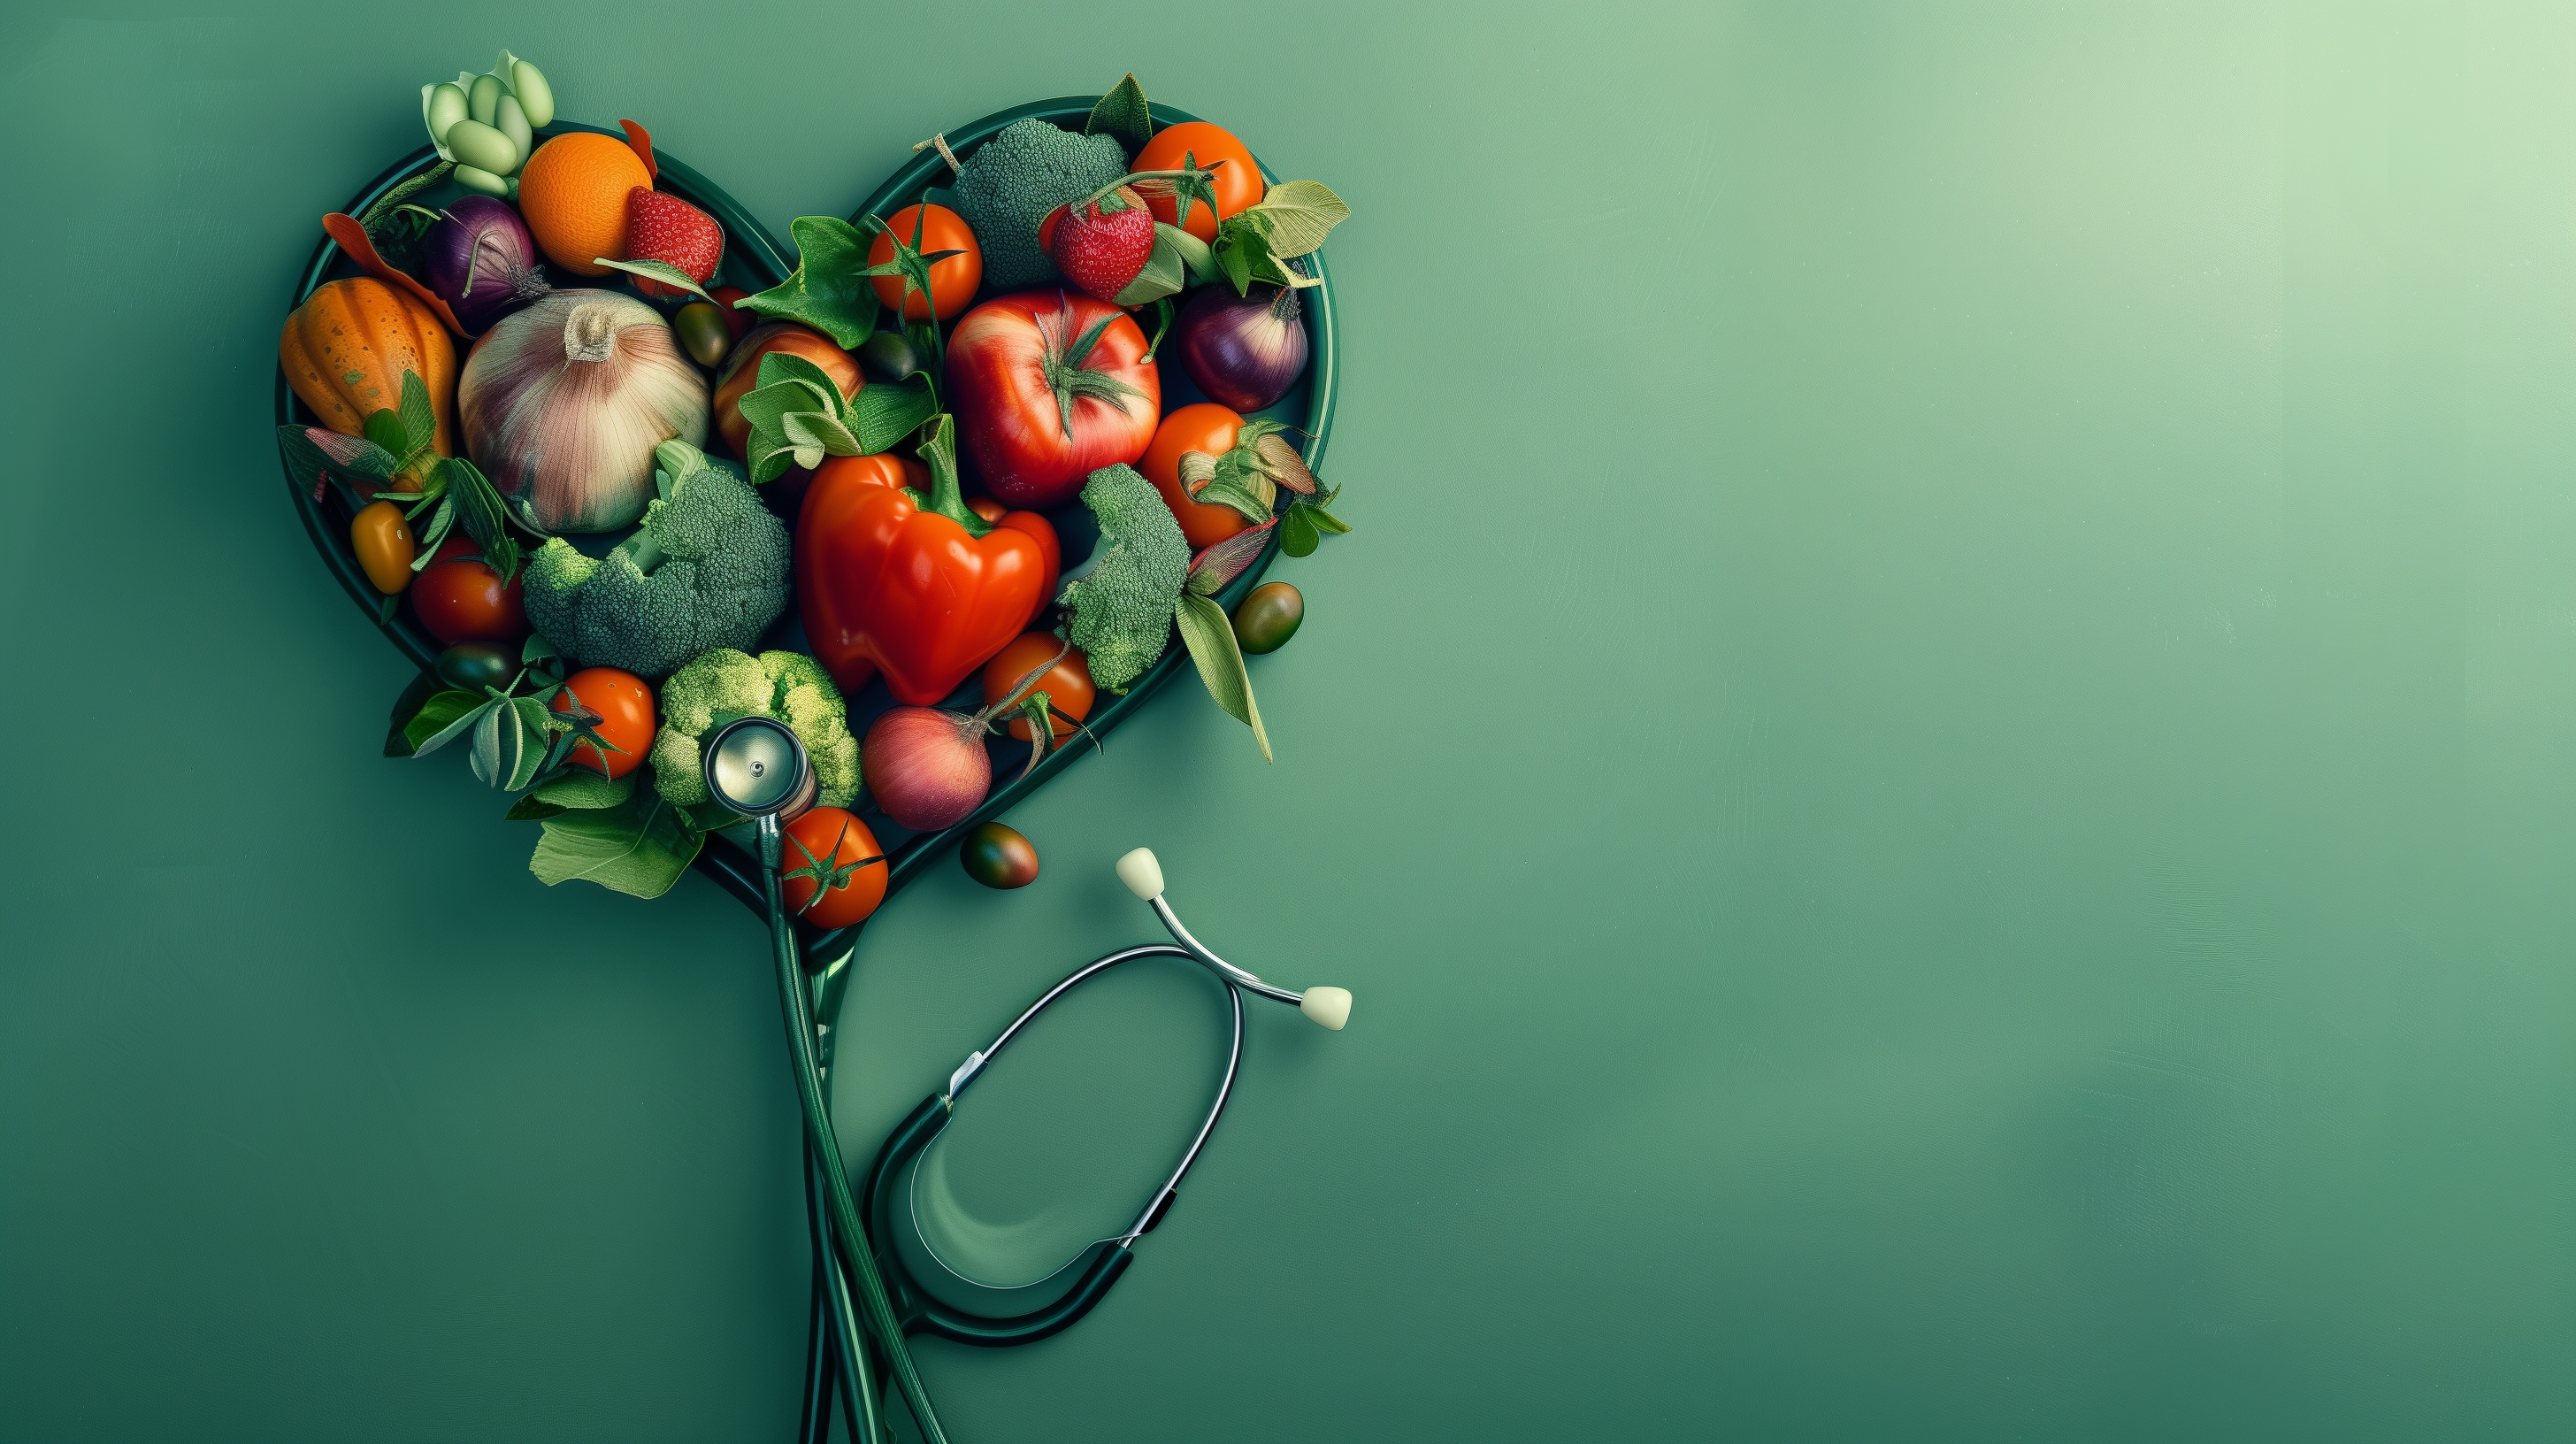 fruits and vegetable shaped into a heart by the cord of a stethoscope